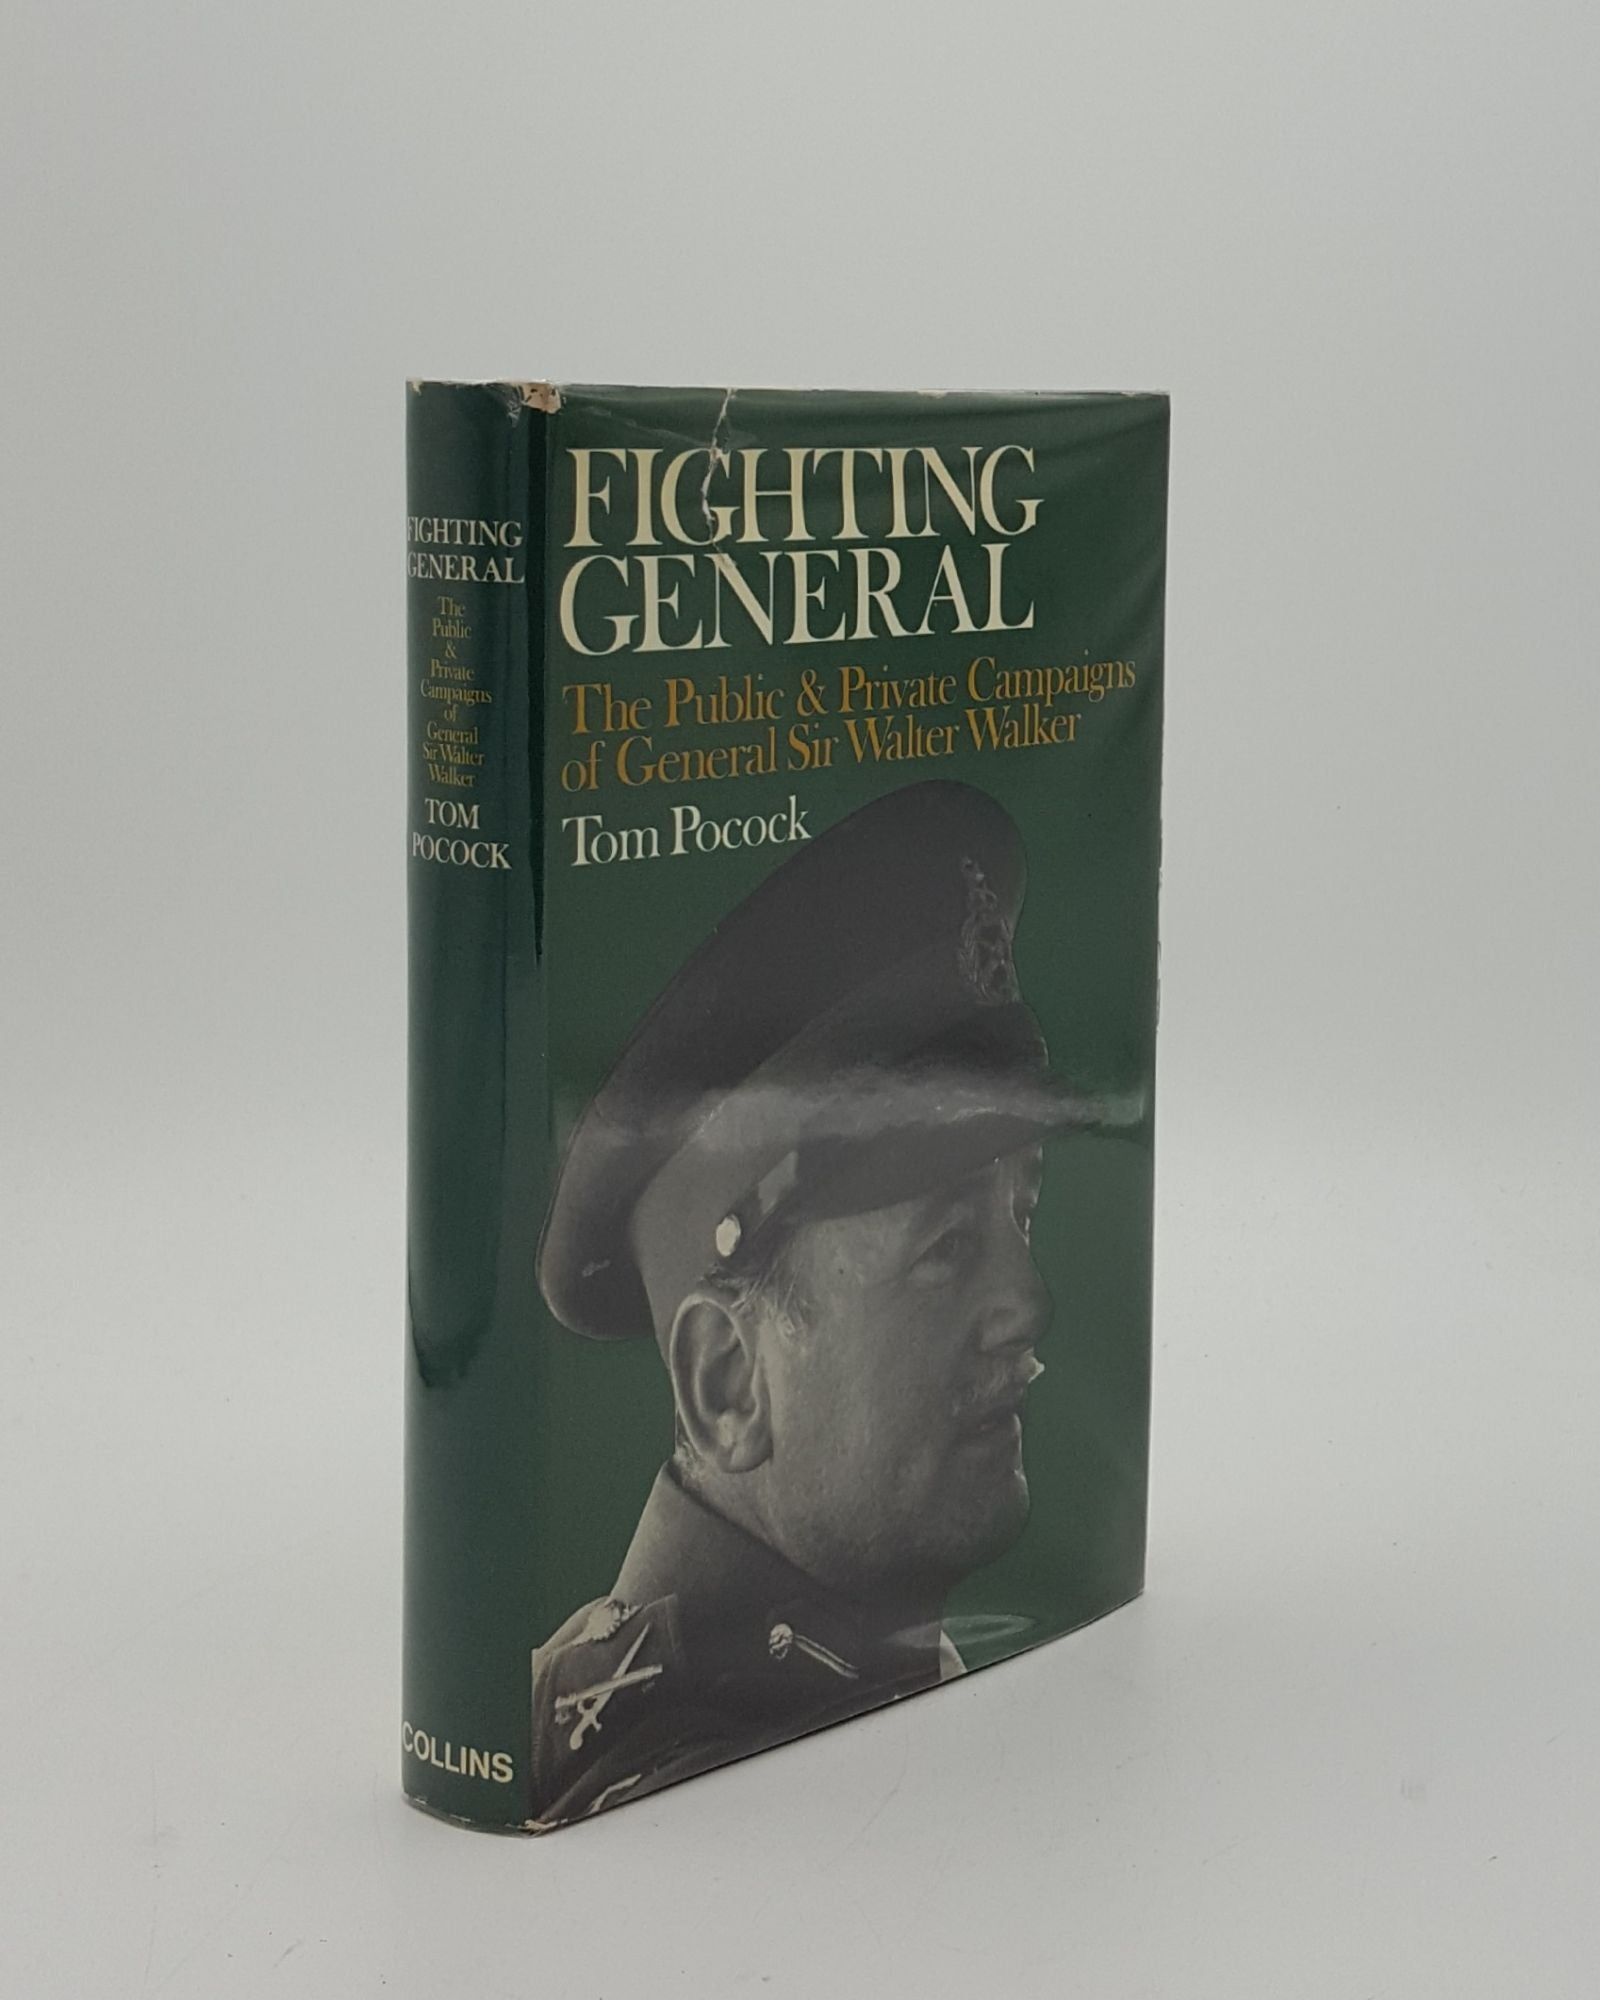 POCOCK Tom - Fighting General the Public and Private Campaigns of General Sir Walter Walker